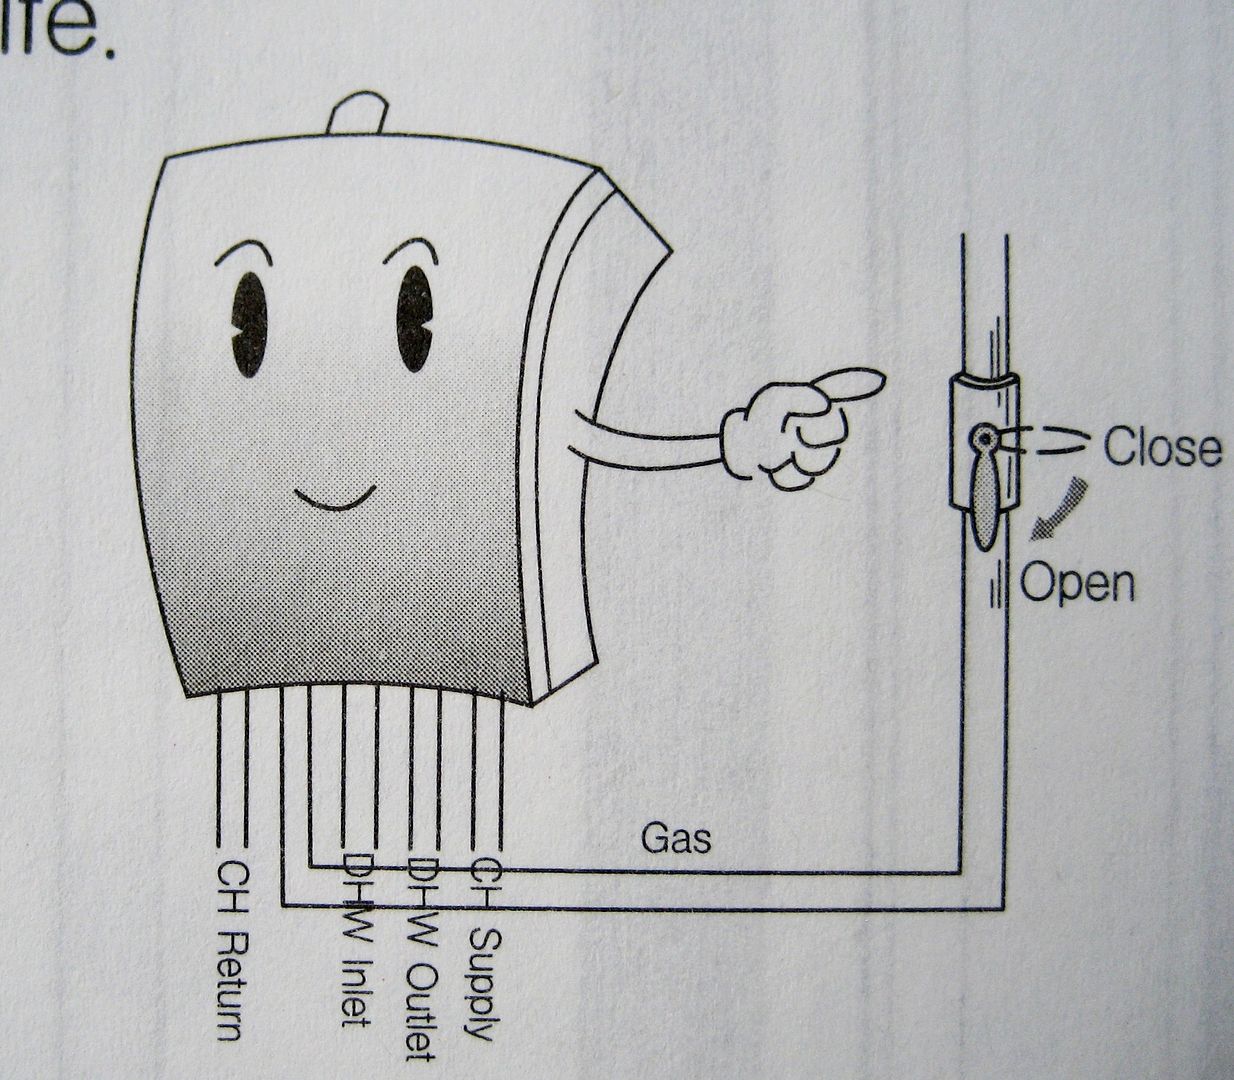 Instructional literature that came with the unit shows that the tankless boiler is a happy little thing. 